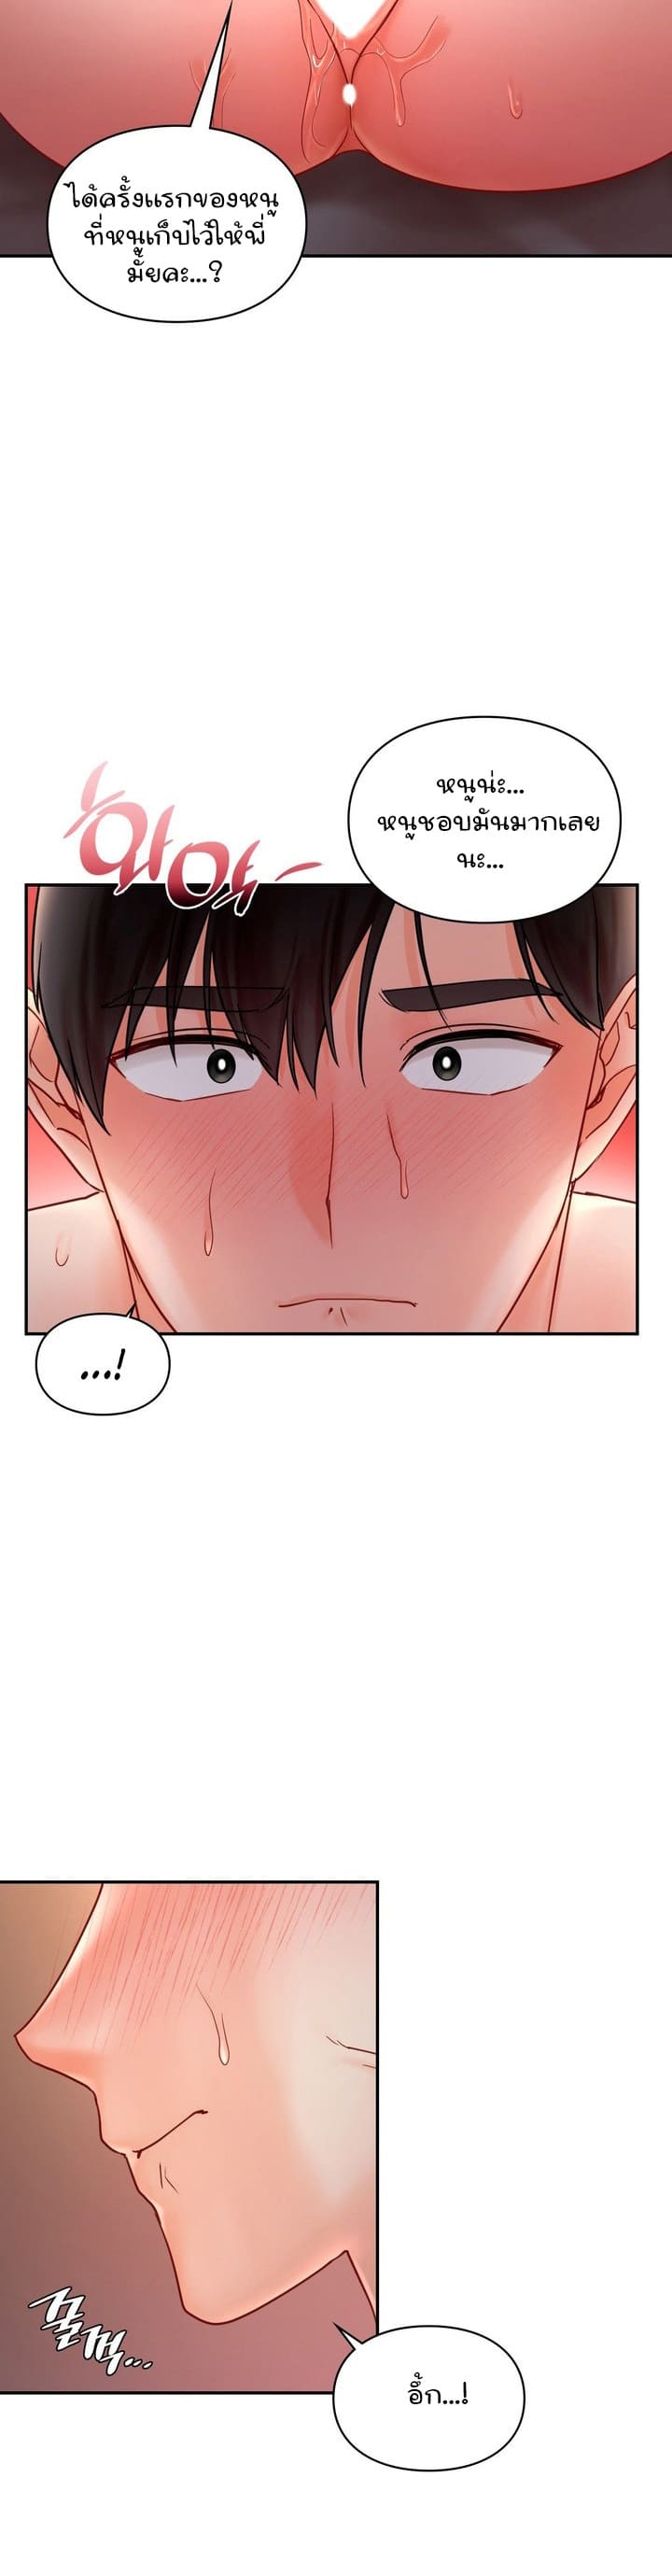 The Kid Is Obsessed With Me ตอนที่ 10 ภาพ 10